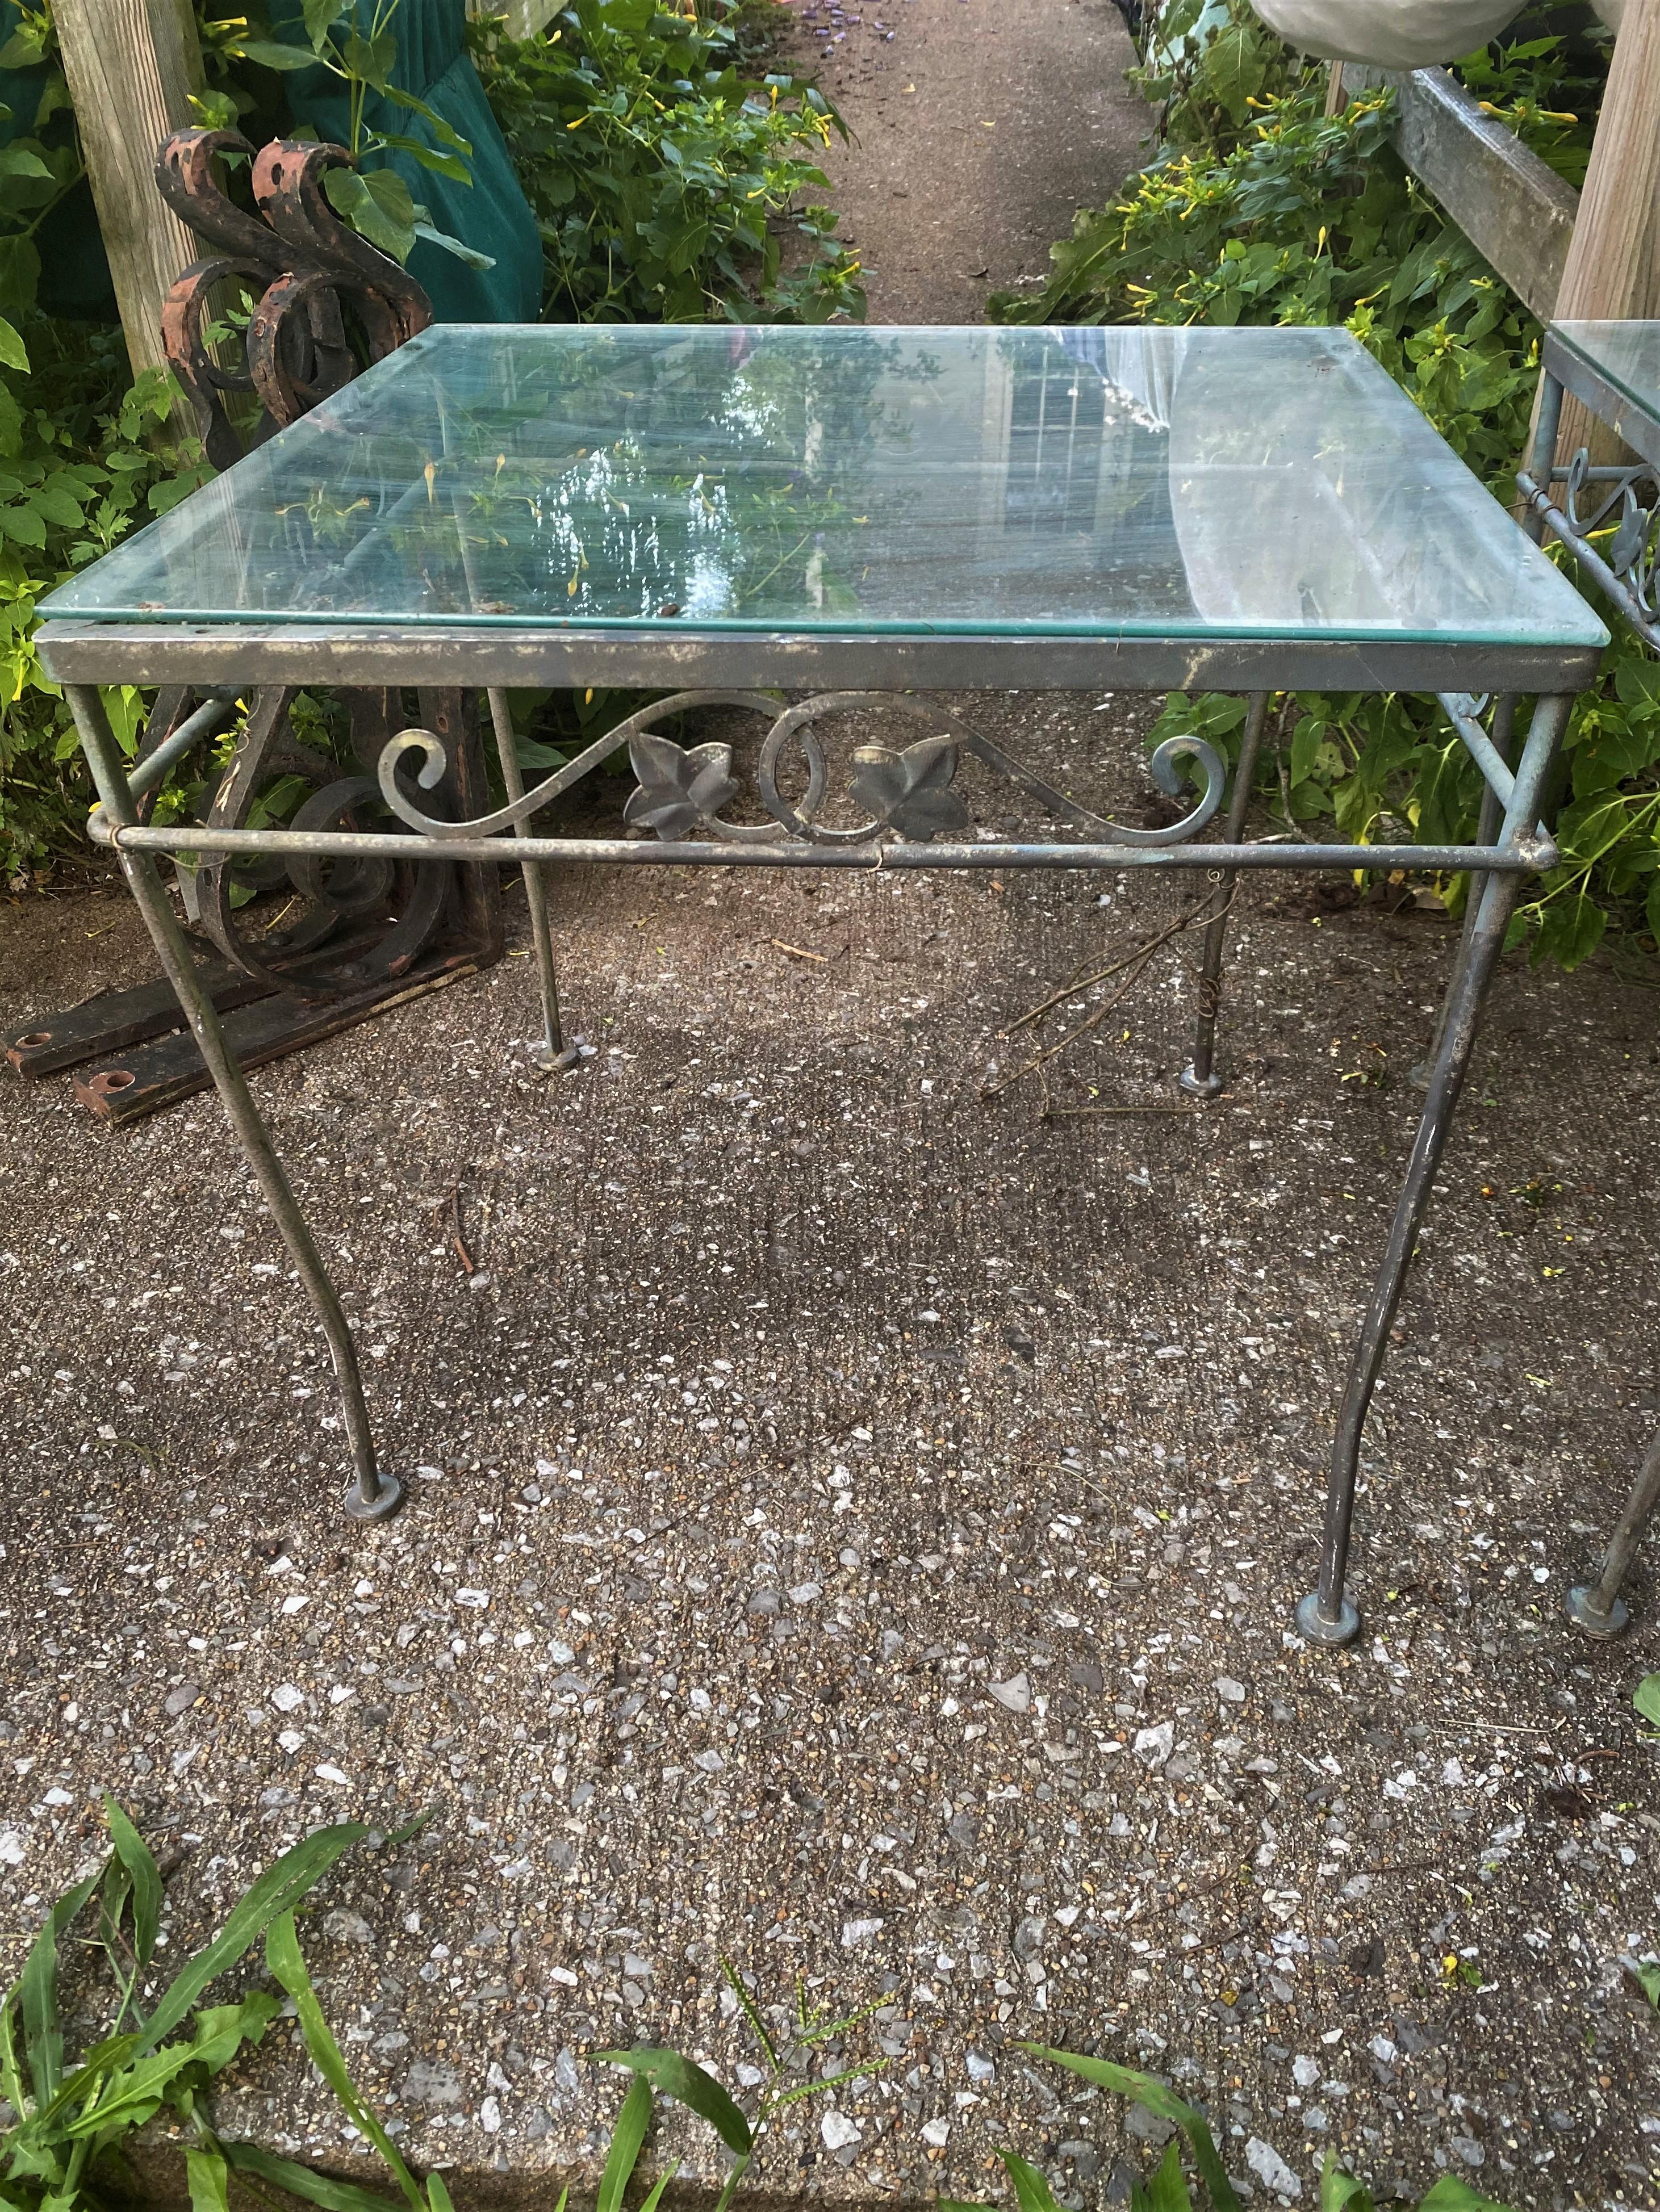 Here are a nice, classic pair of matching wrought iron side or end tables which can be used in many ways. They were originally made for outside or porch use but I love when outside furniture  is used inside. The tables are in good shape, both have